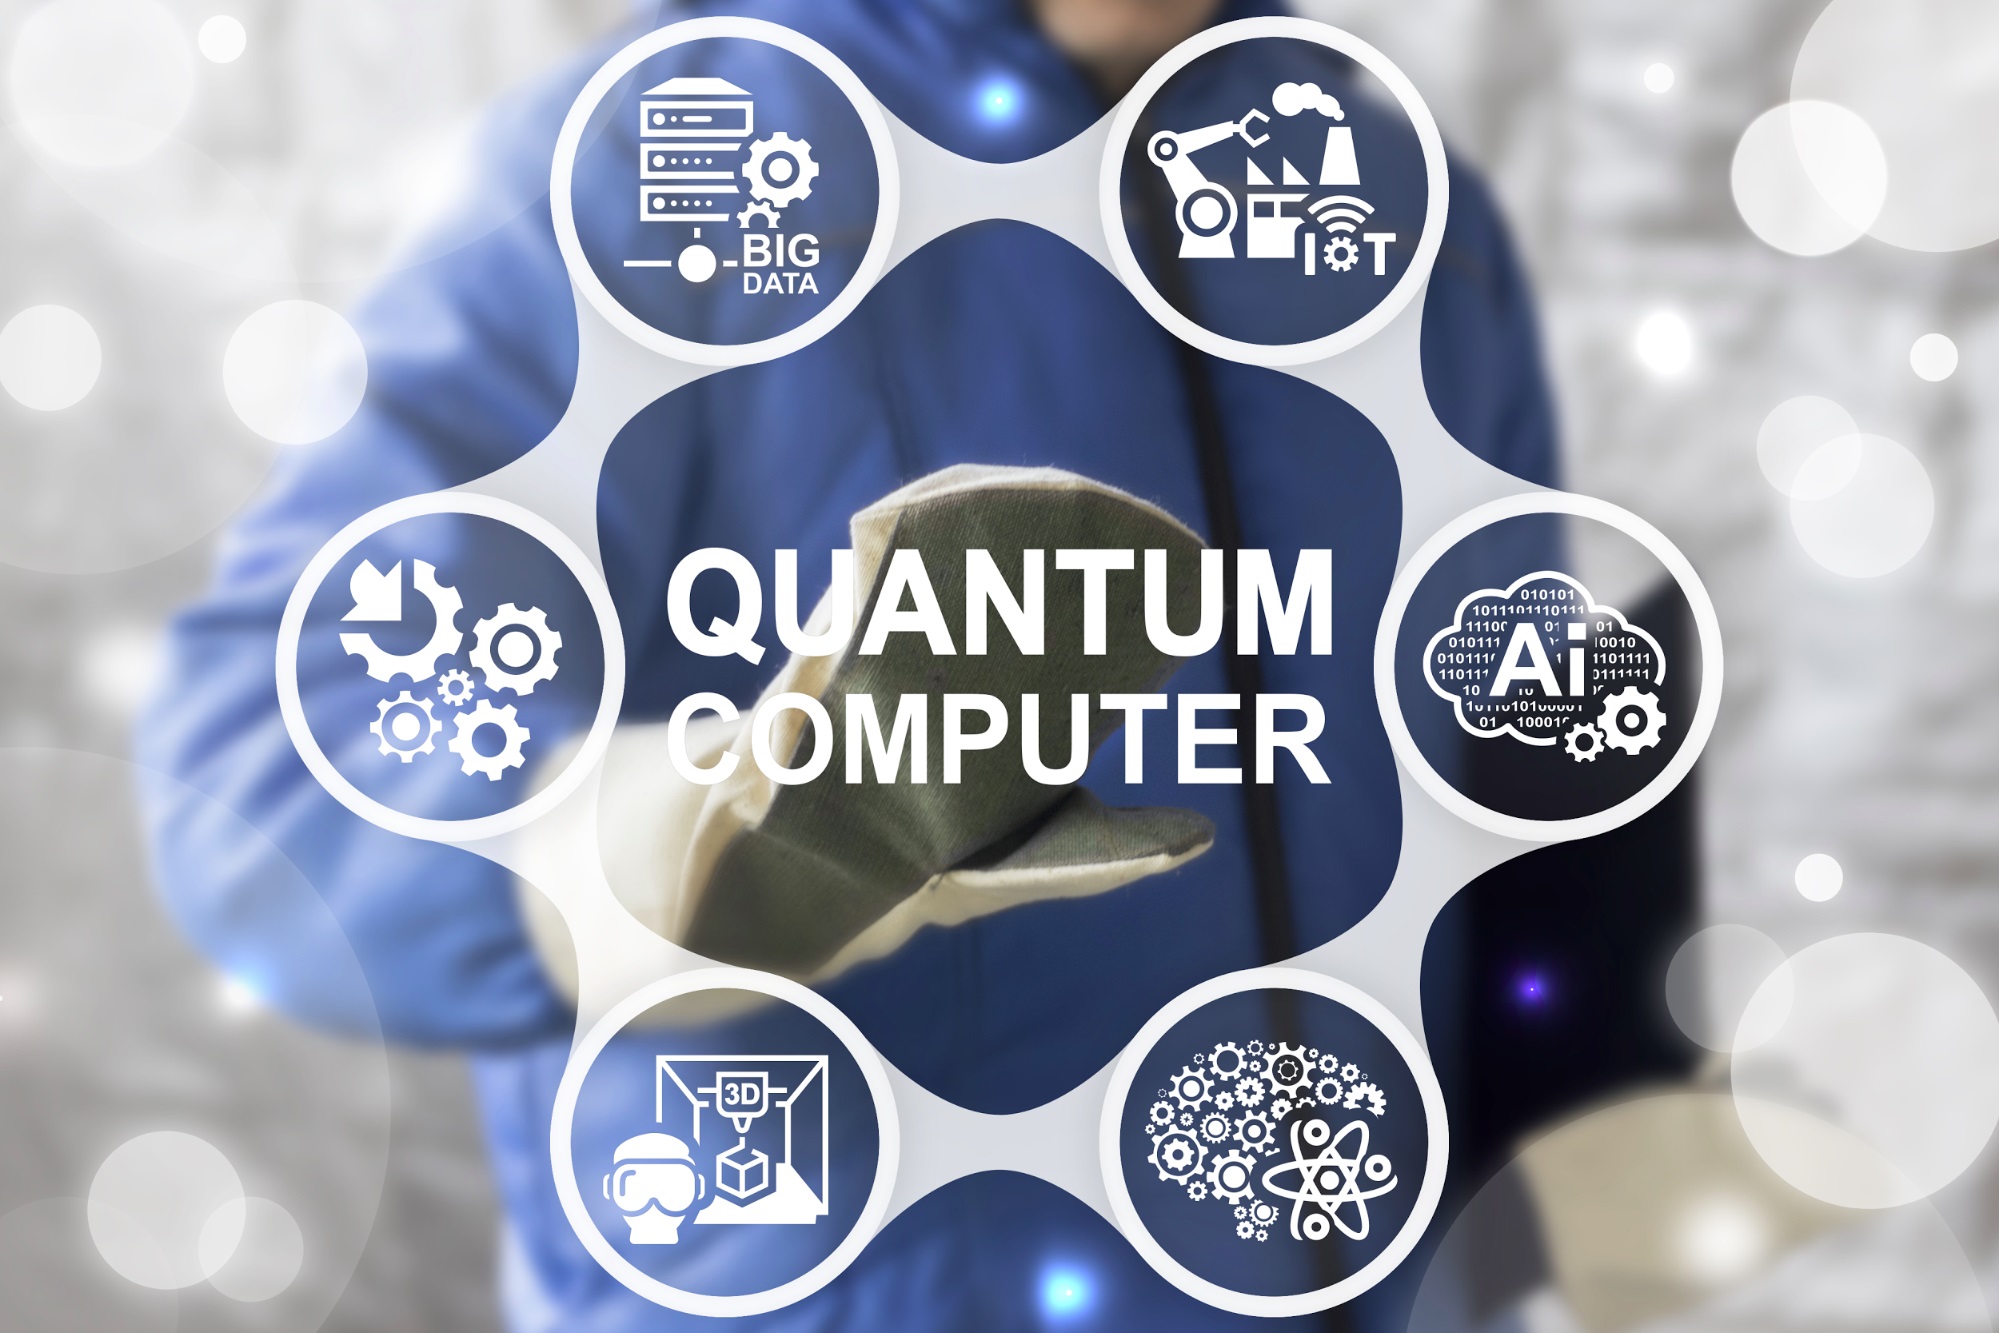 Are Practical Quantum Computers Coming in 2018?